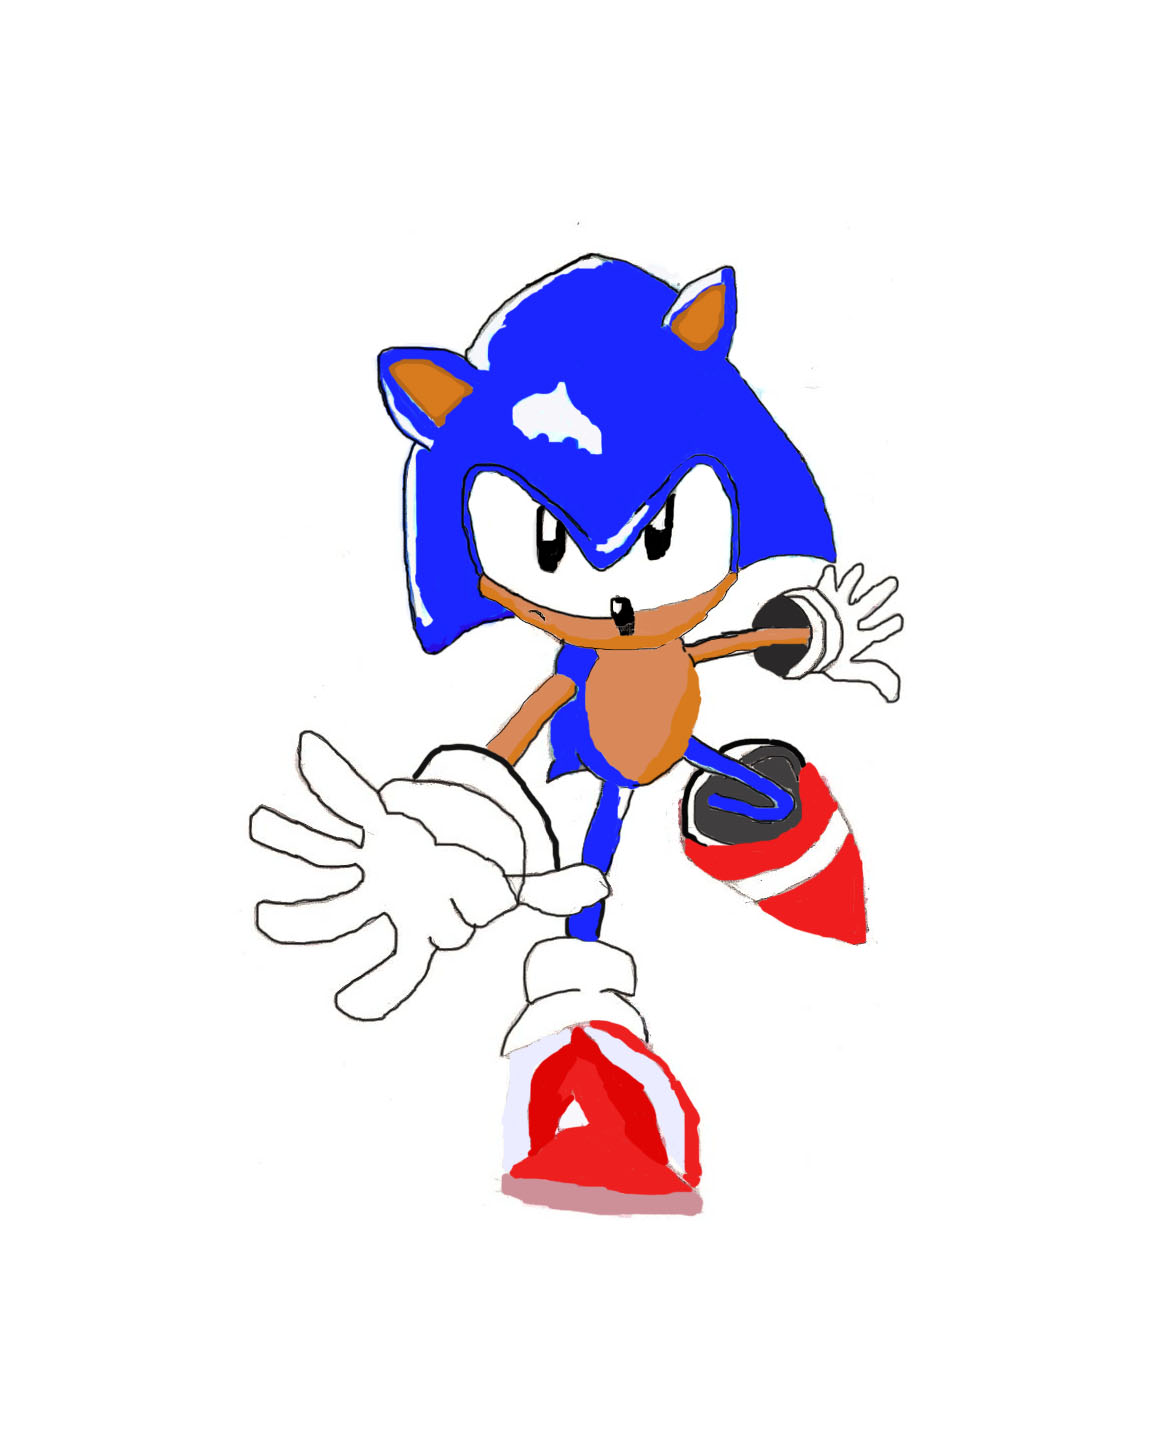 Sonic 3D redone on Photoshop by nextguardian